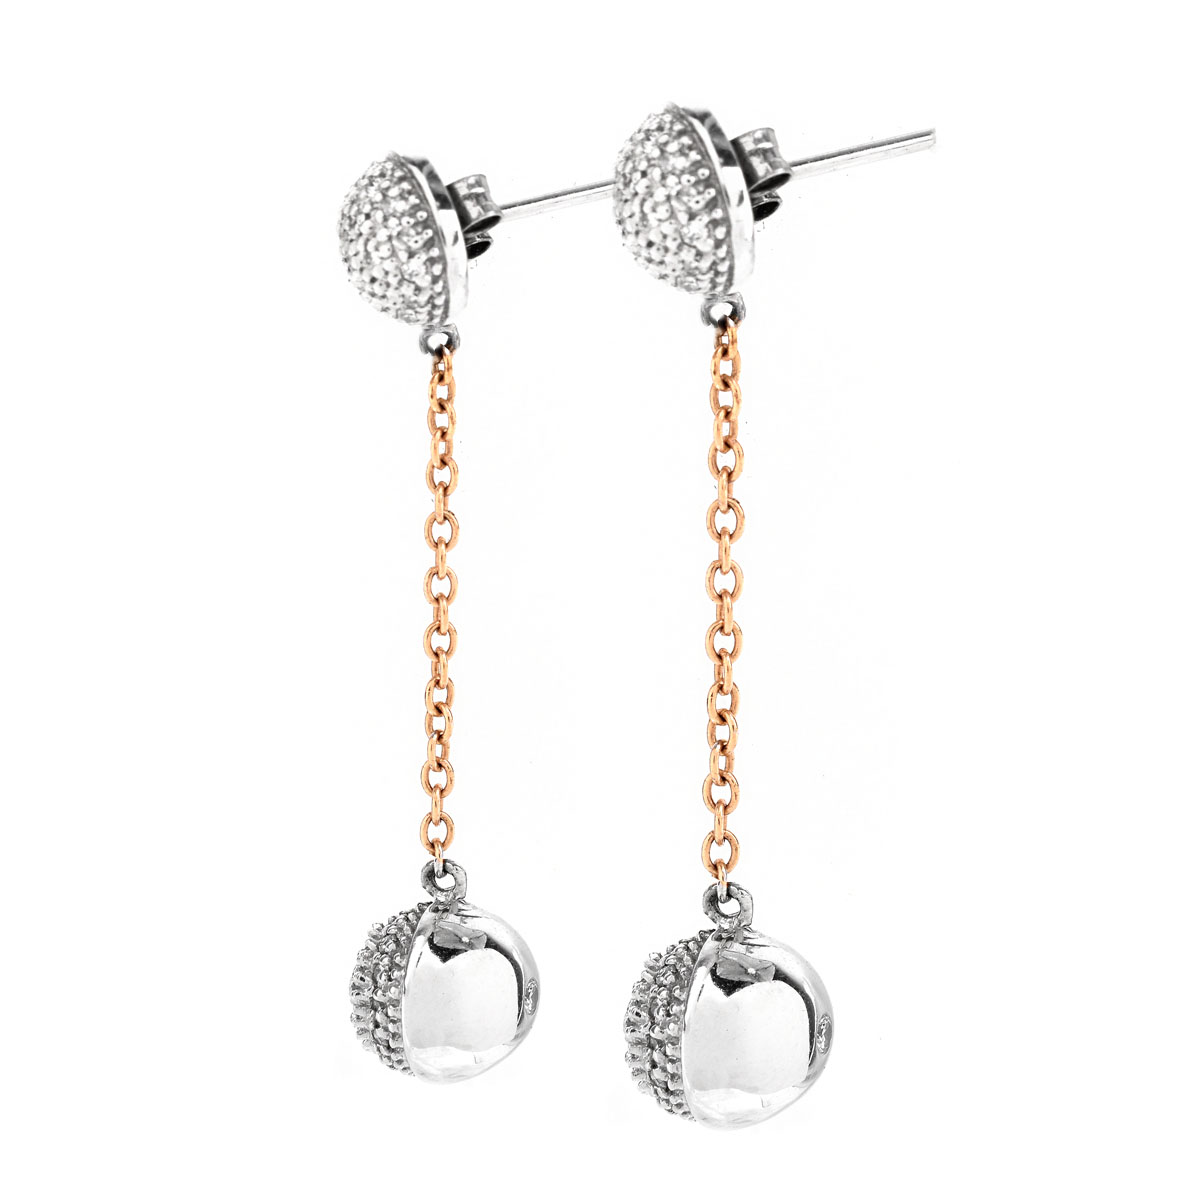 Micro Pave Diamond and 14 Karat White and Yellow Gold Dangle Earrings. Stamped 14K.